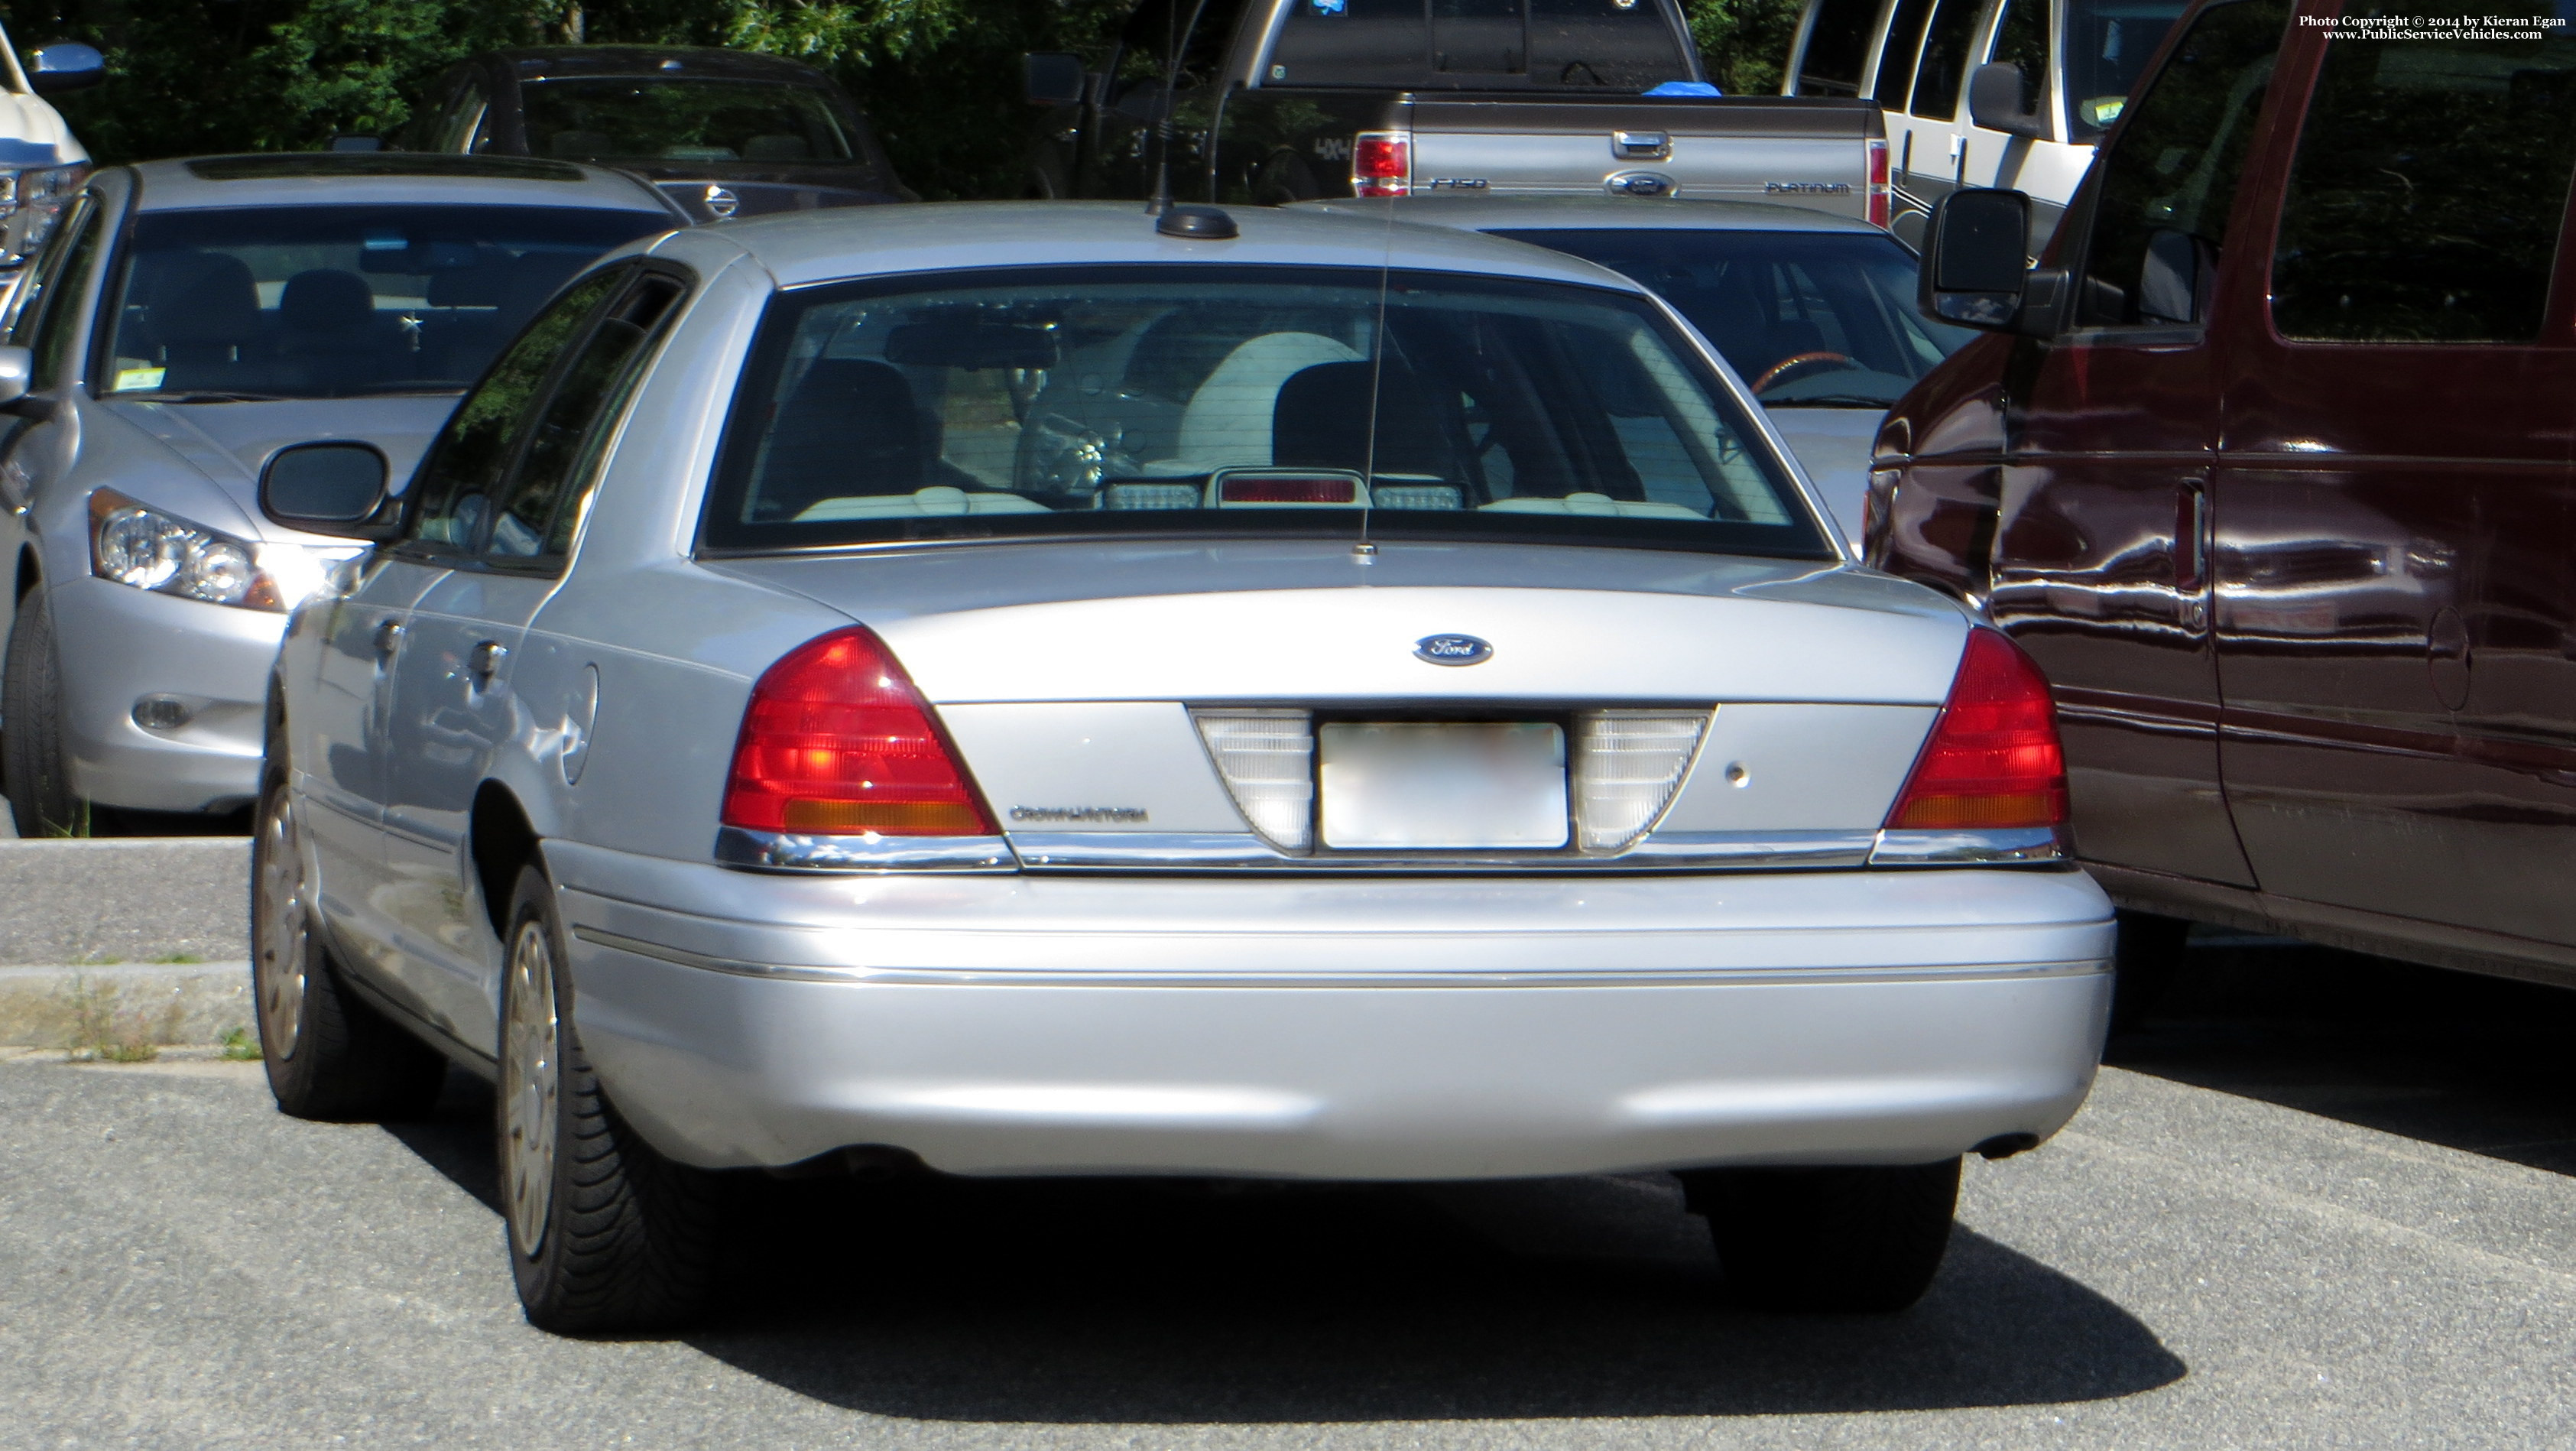 A photo  of Barnstable Police
            Unmarked Unit, a 2003-2005 Ford Crown Victoria             taken by Kieran Egan